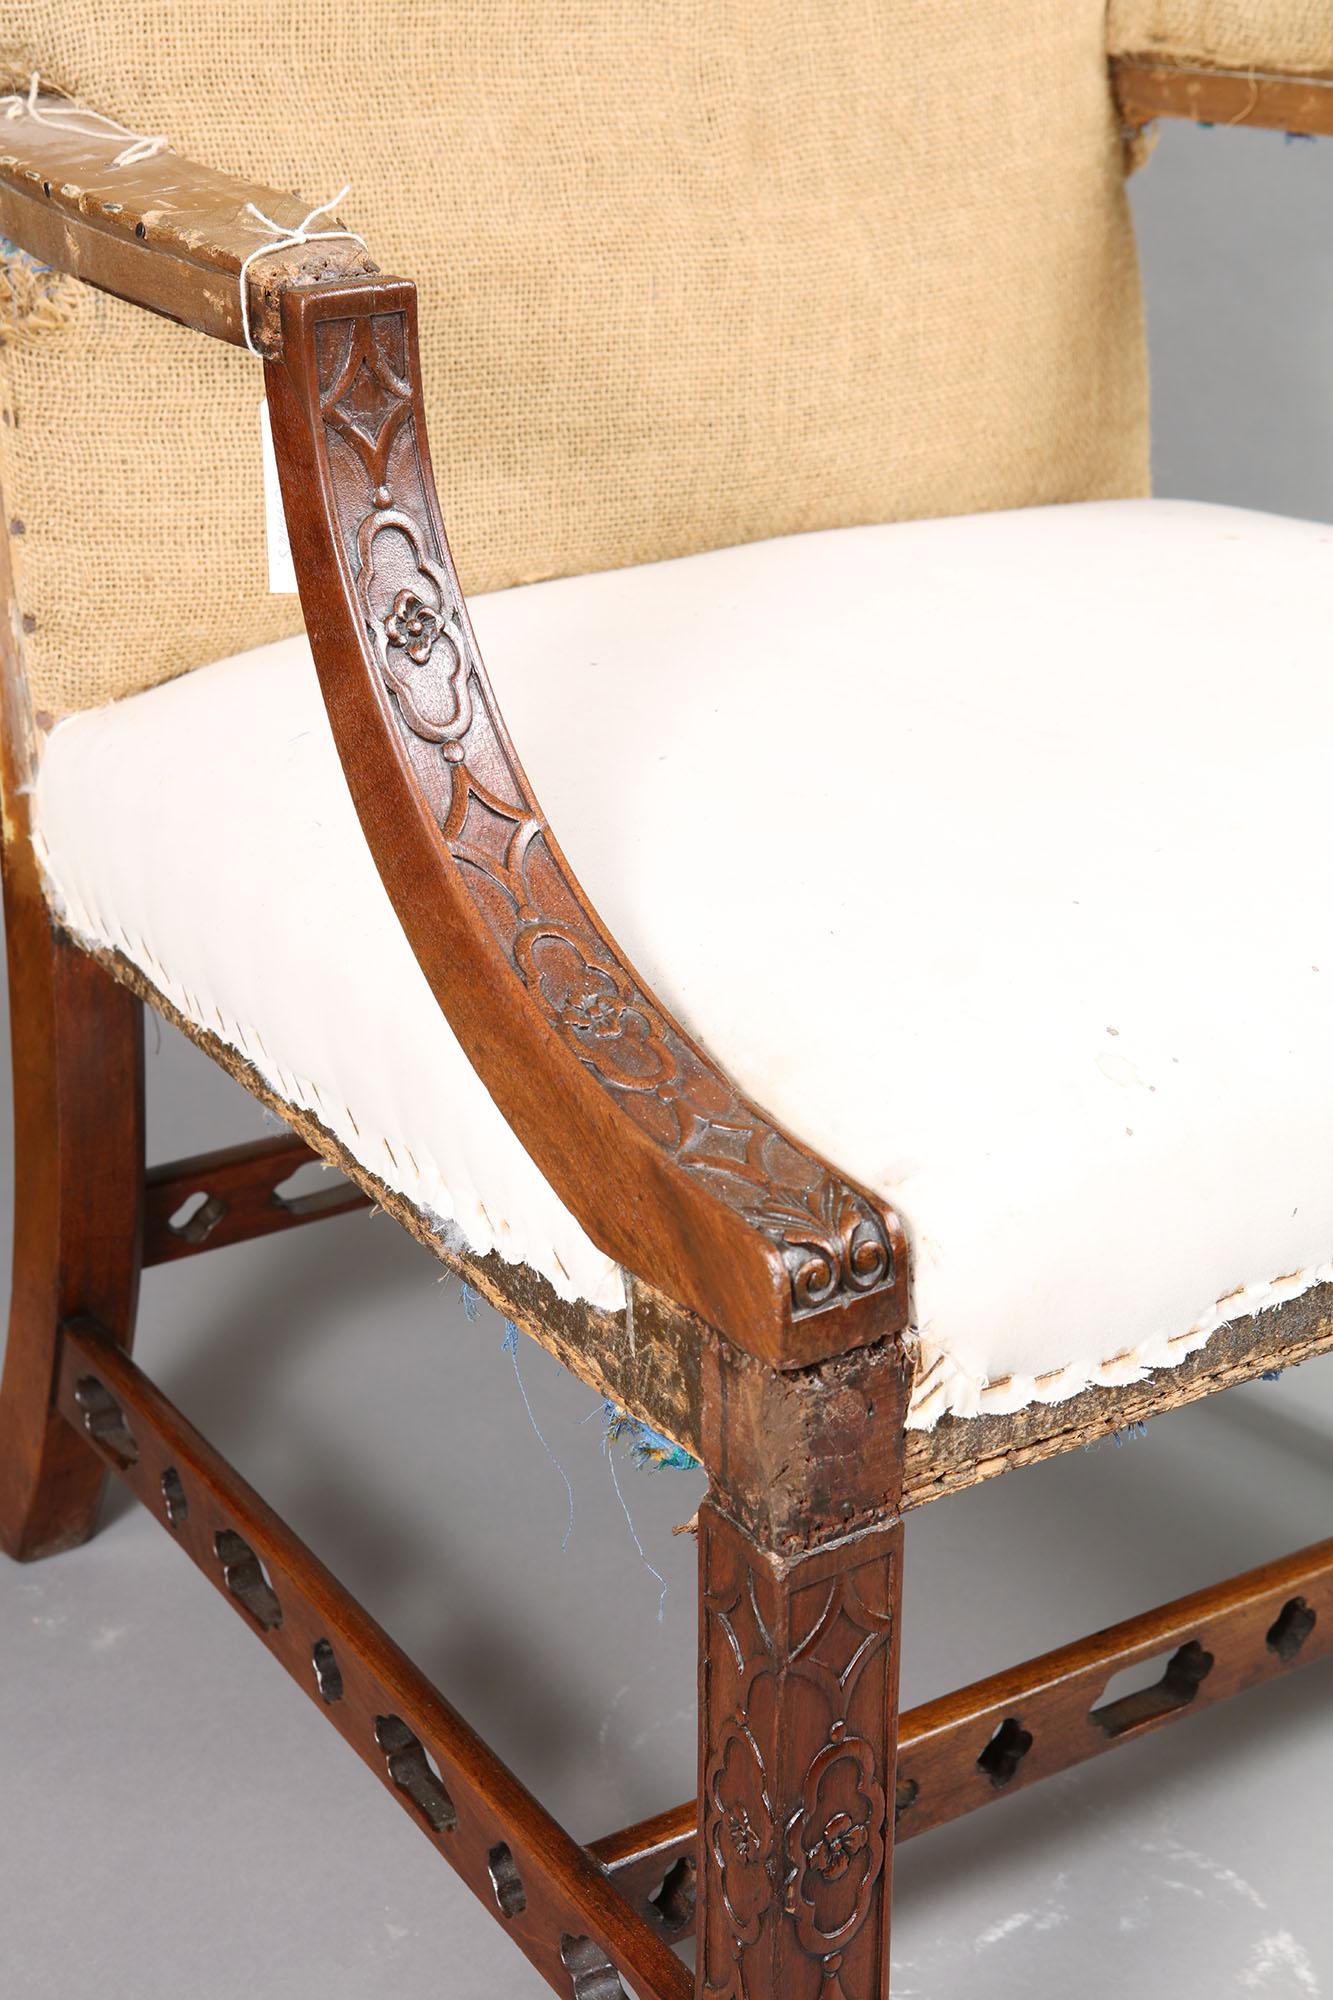 18th Century Pair of George III Mahogany Fretwork Gainsborough Armchairs In Good Condition In London, by appointment only